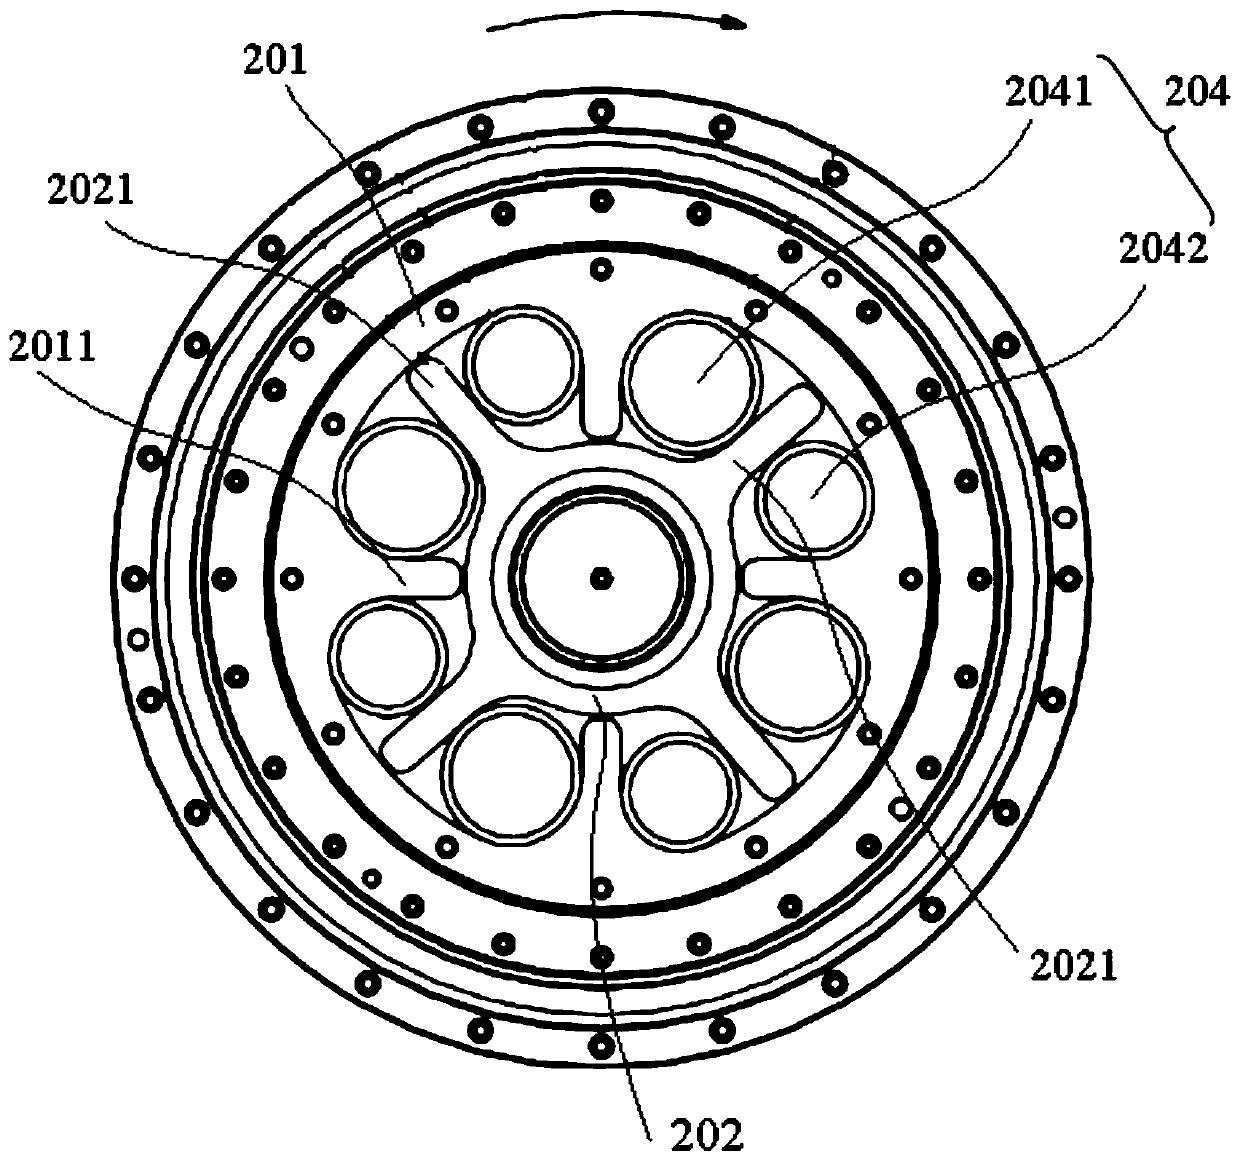 Shock absorbing device and engine system